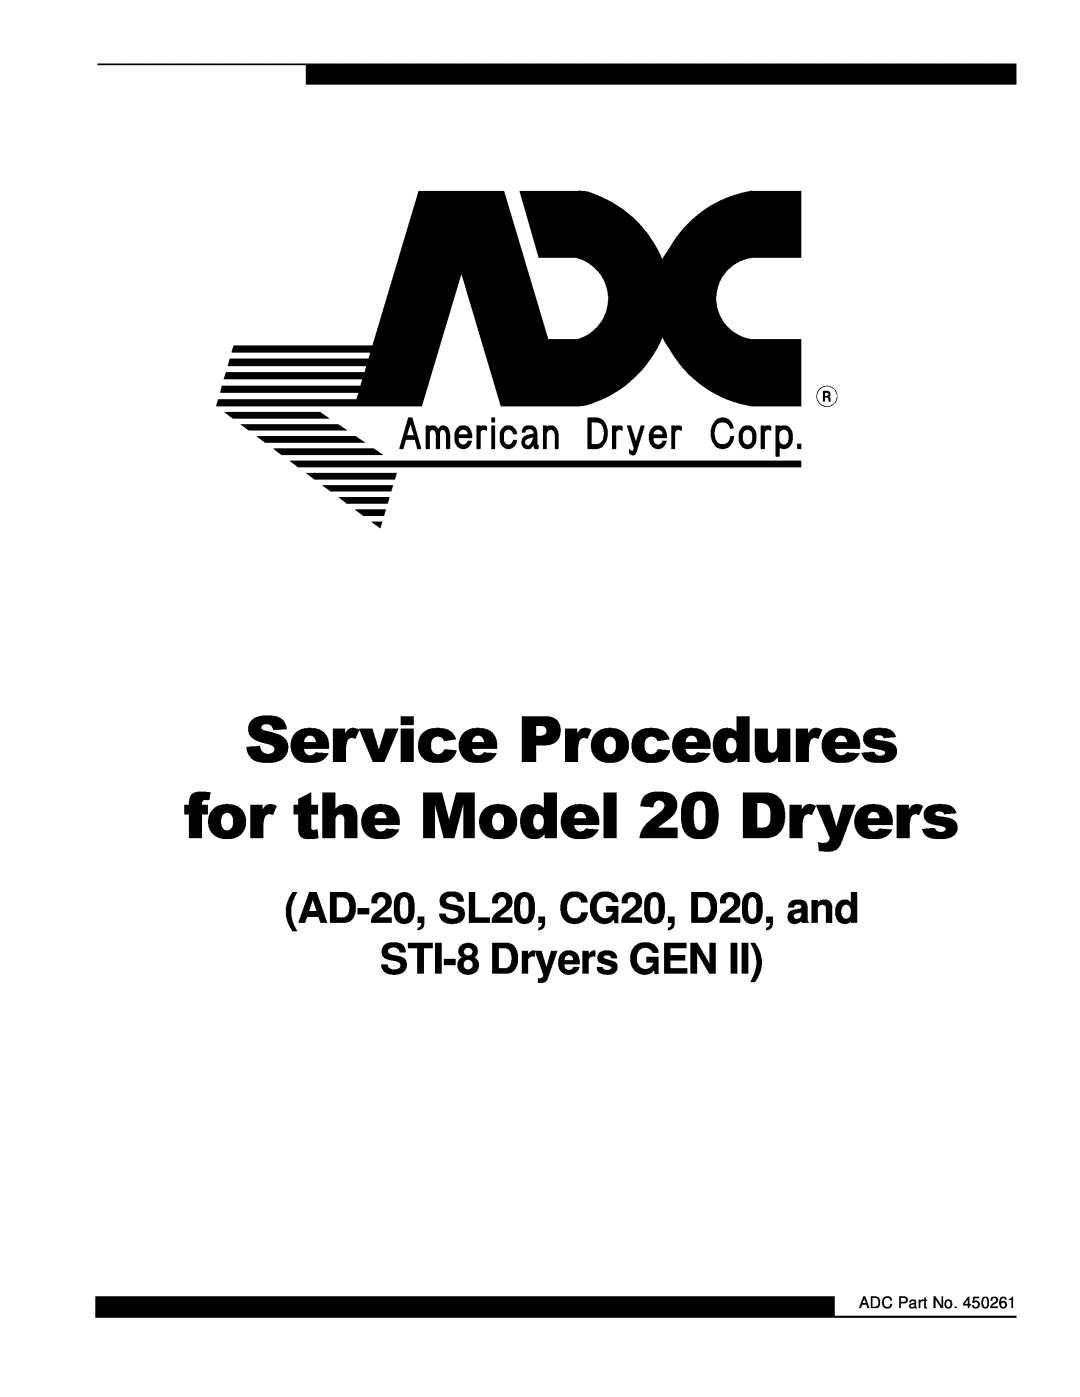 American Dryer Corp manual Service Procedures for the Model 20 Dryers, AD-20, SL20, CG20, D20, and STI-8 Dryers GEN 